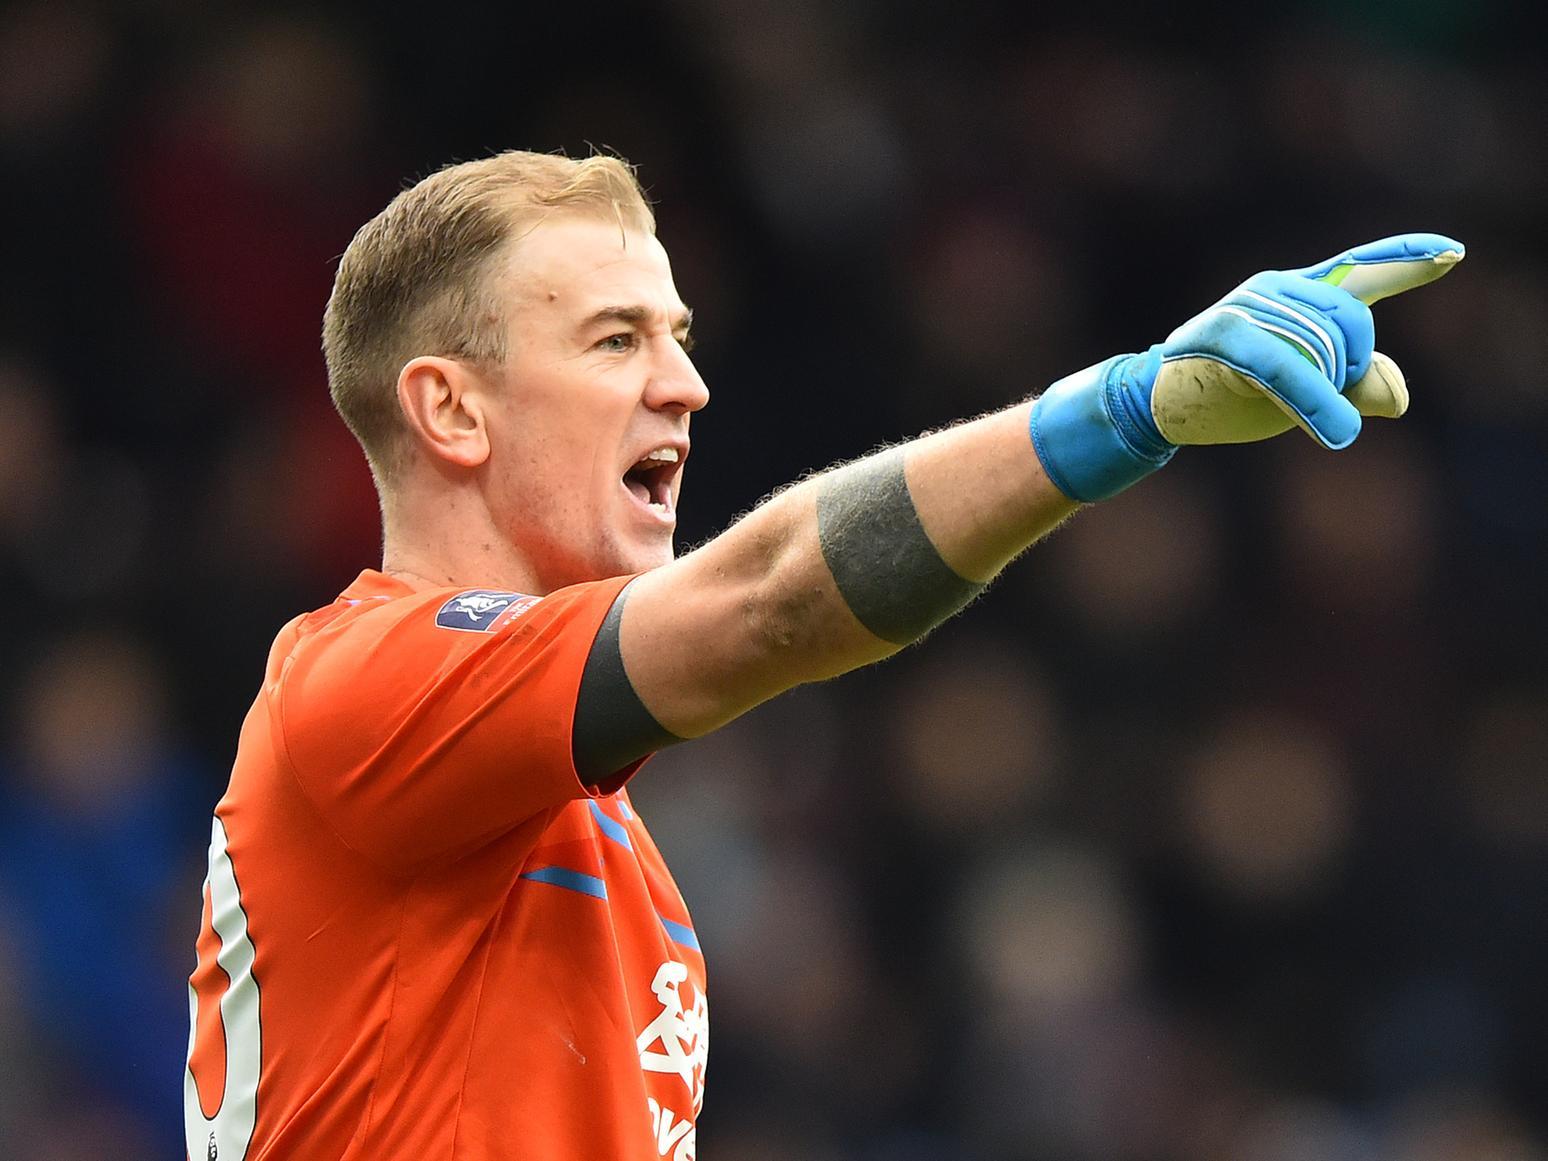 Hart, who has 70 caps for England, kept three clean sheets in his first few games for Burnley, but then the goals started leaking. The goalkeeper has since conceded 46 times in 20 games for Sean Dyche's side.